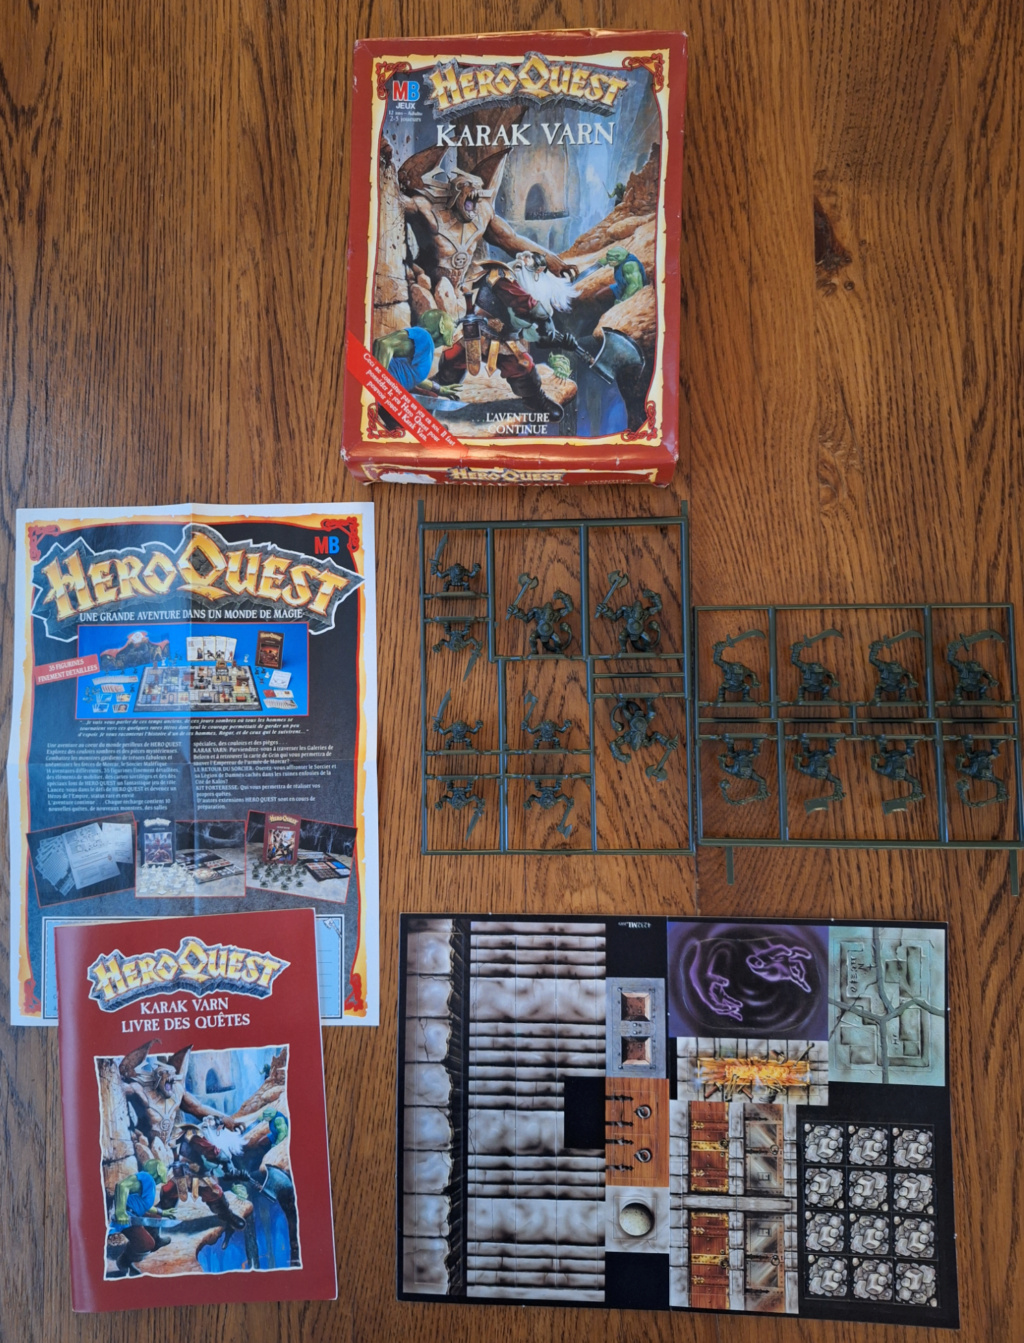 Ma Collec' HeroQuest Image50